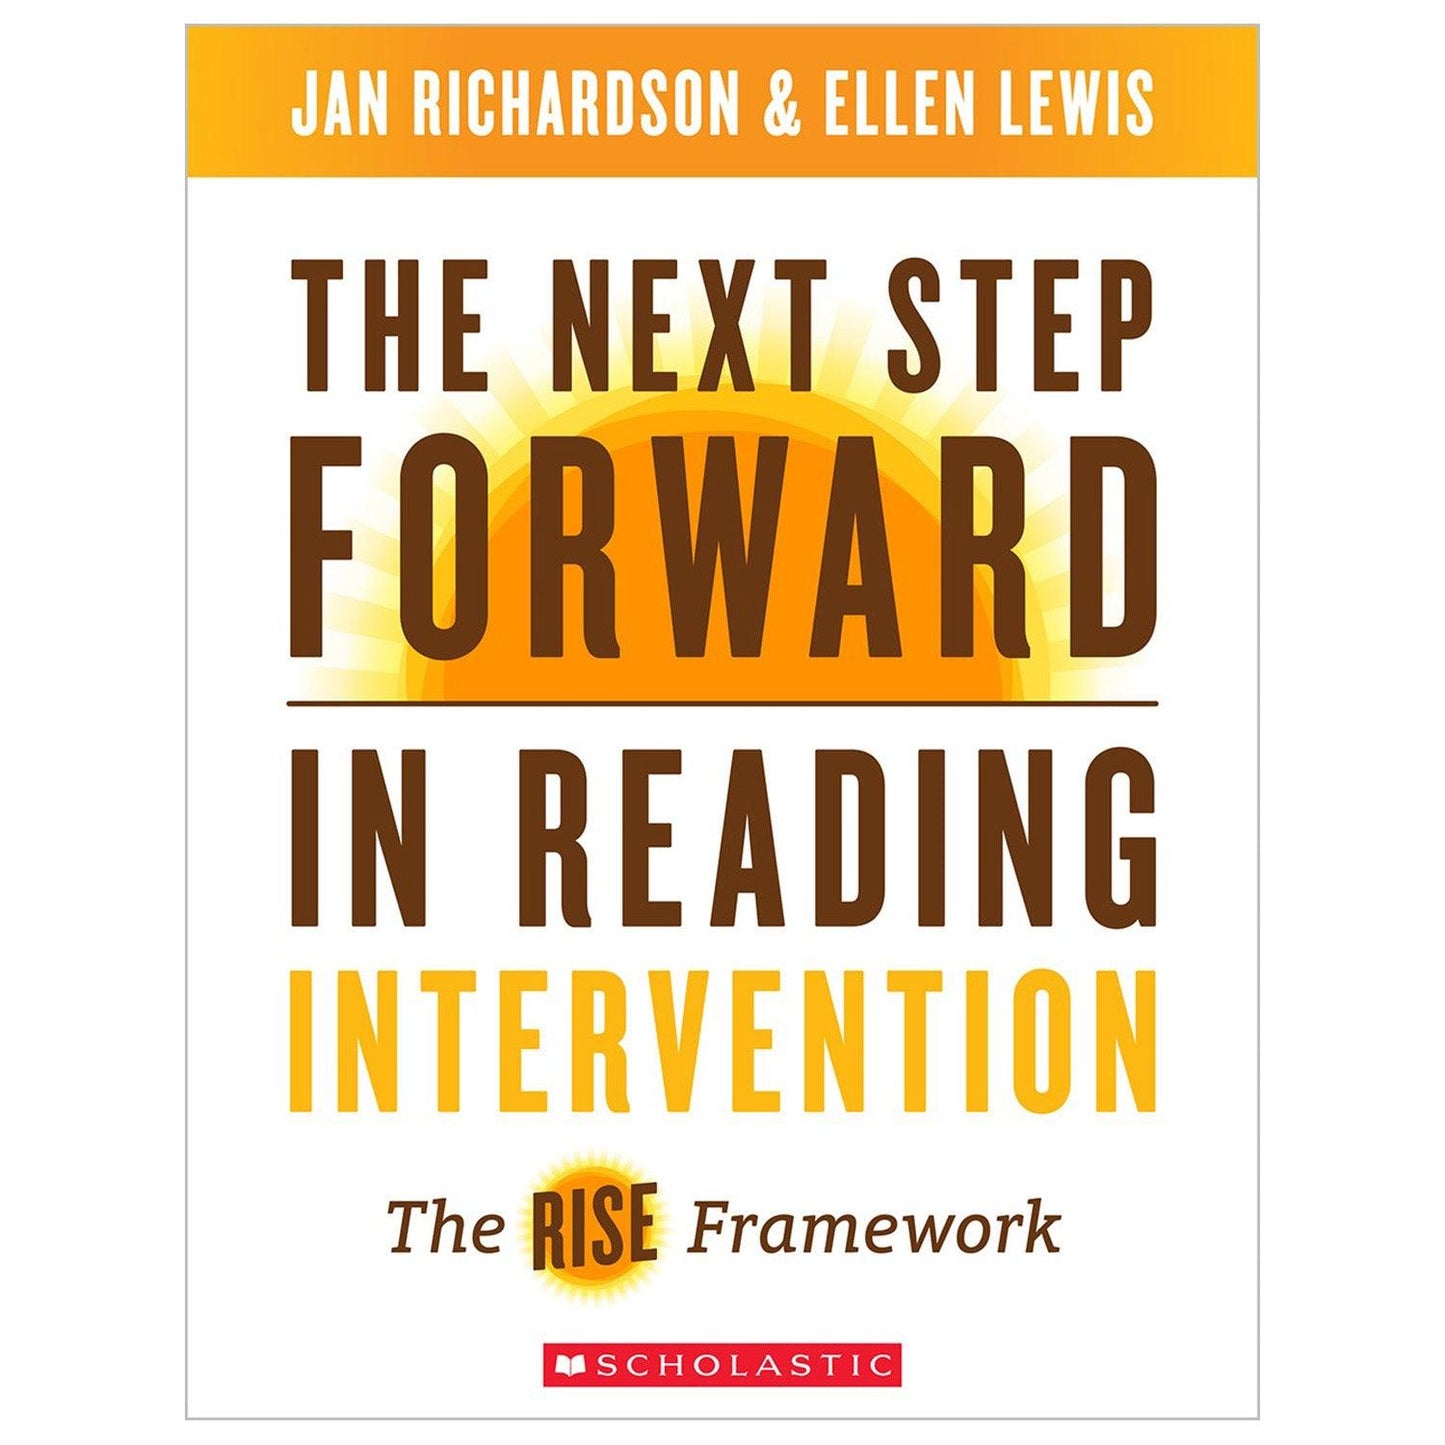 The Next Step Forward In Reading Intervention - Loomini